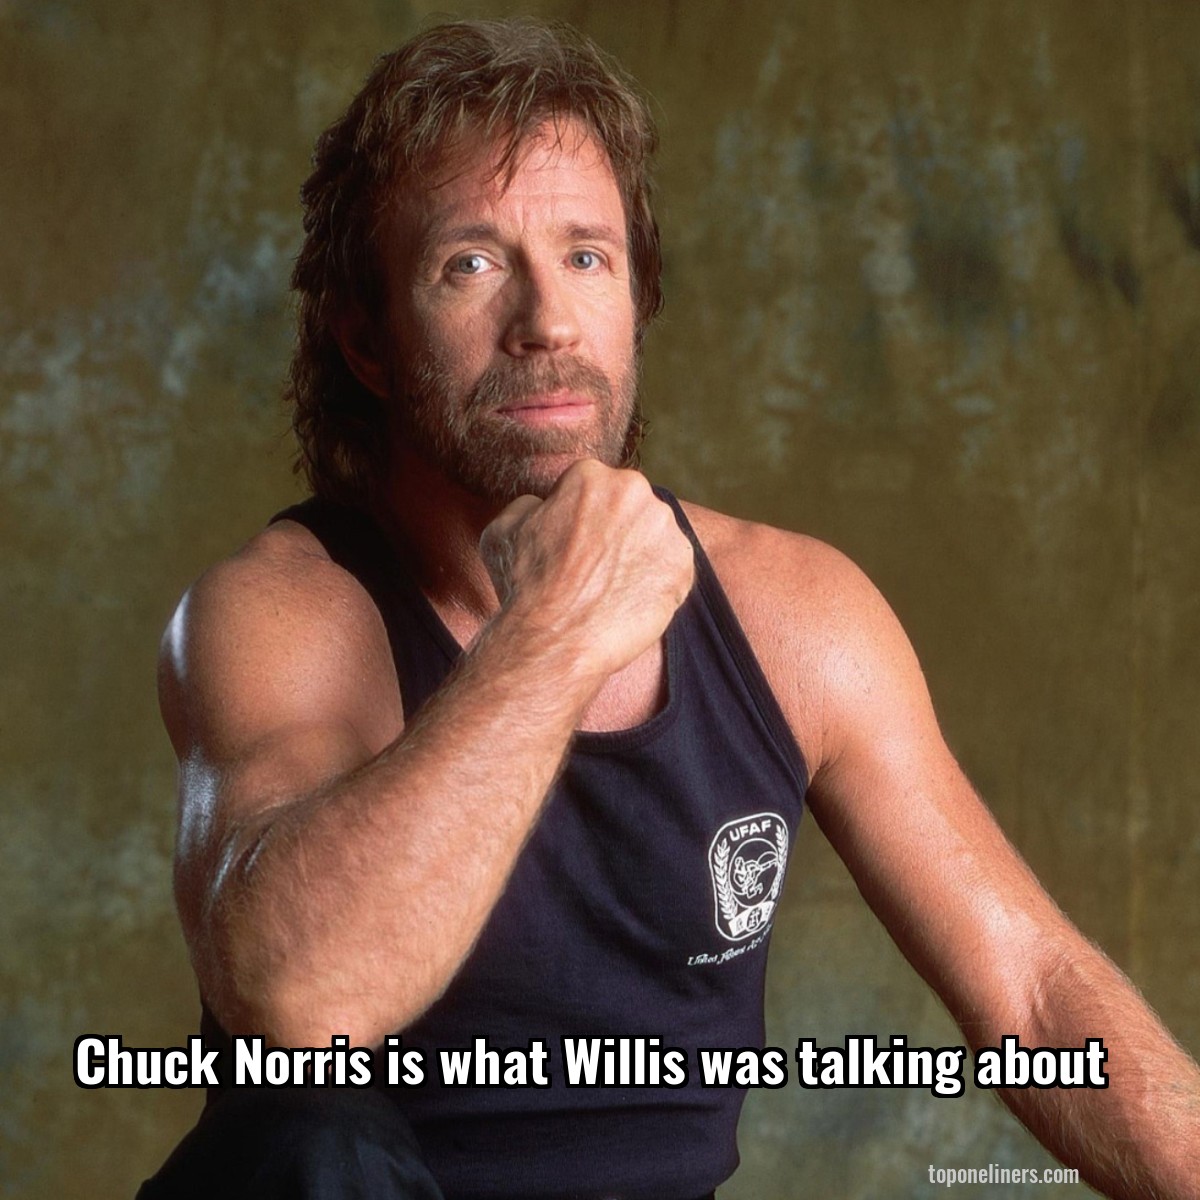 Chuck Norris is what Willis was talking about